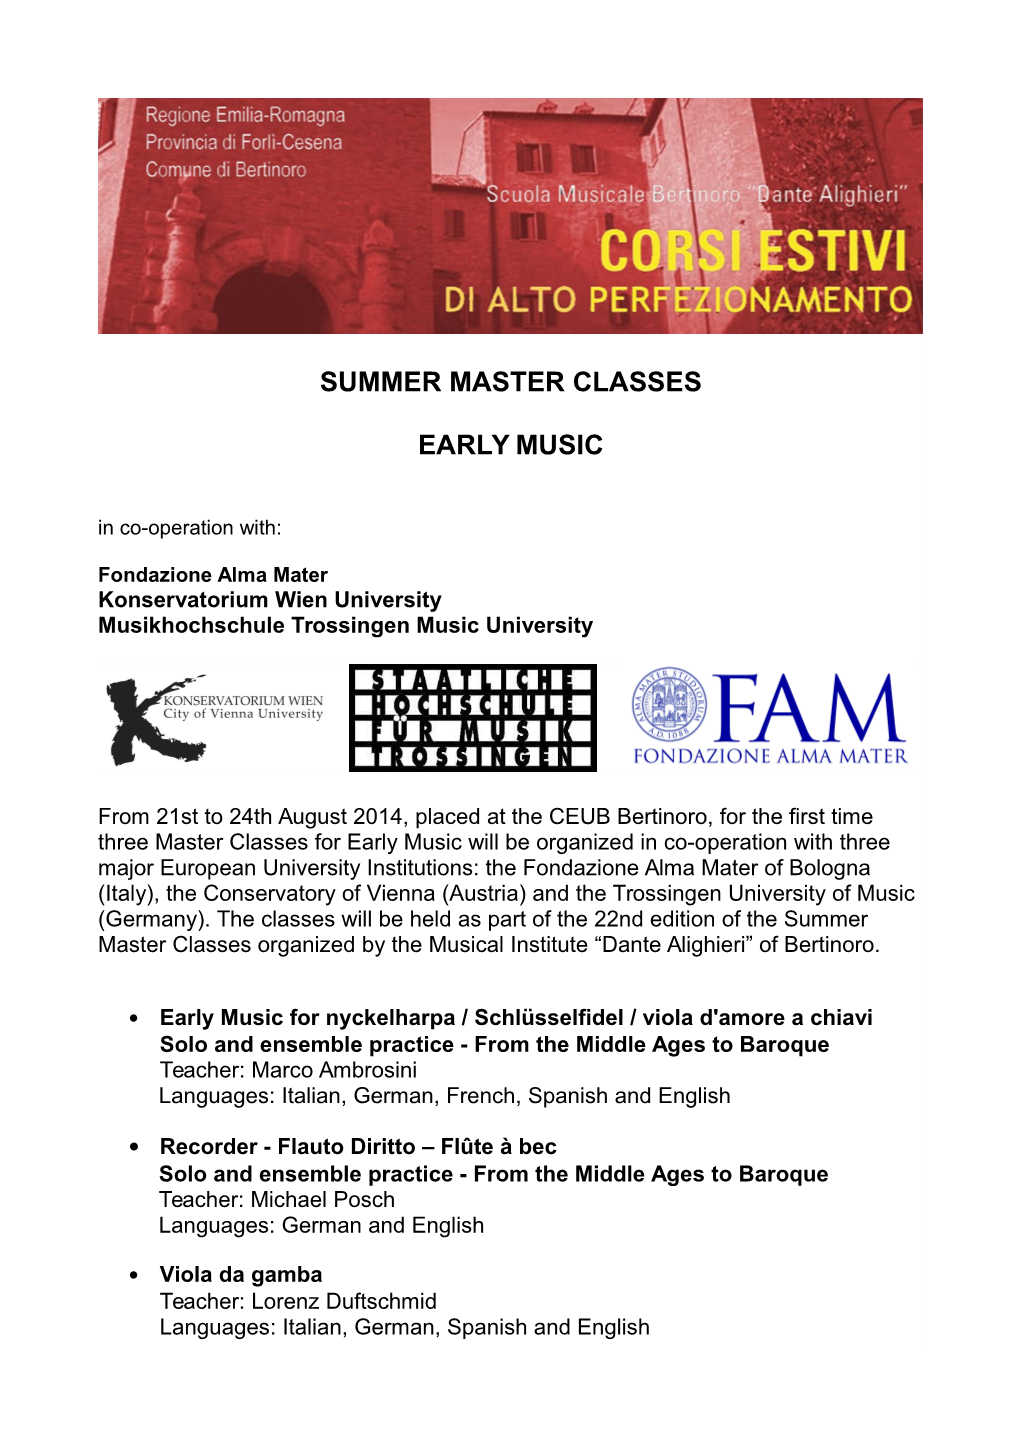 Summer Master Classes Early Music